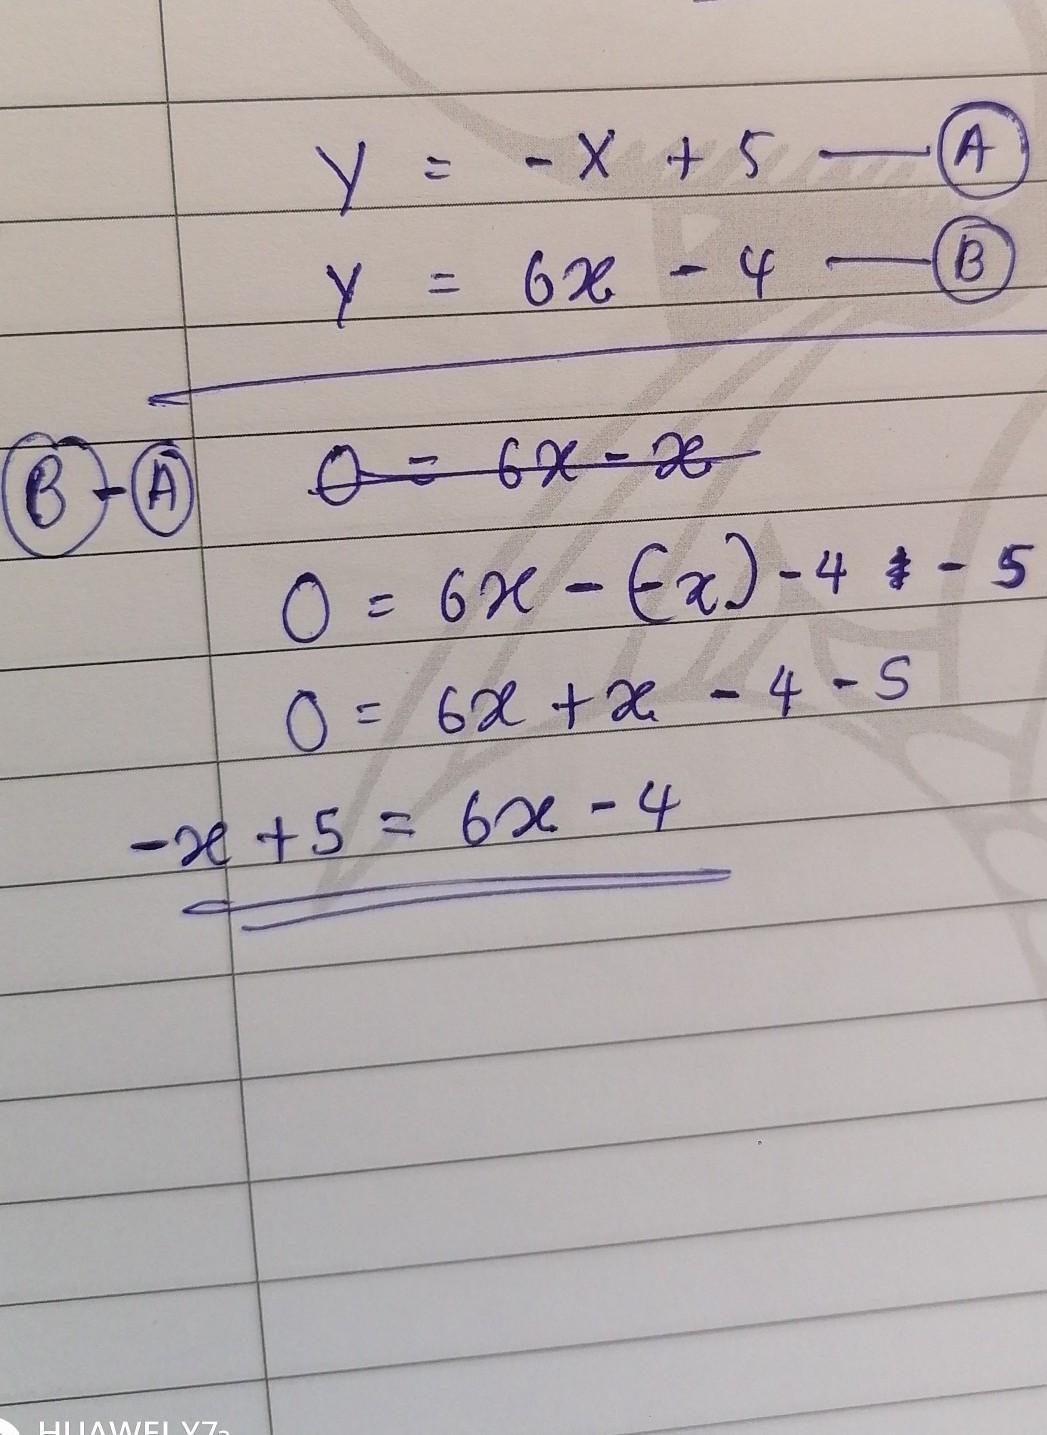 NEED HELP PLZConsider The Following Set Of Equations:Equation A: Y = -x + 5Equation B: Y = 6x 4Which